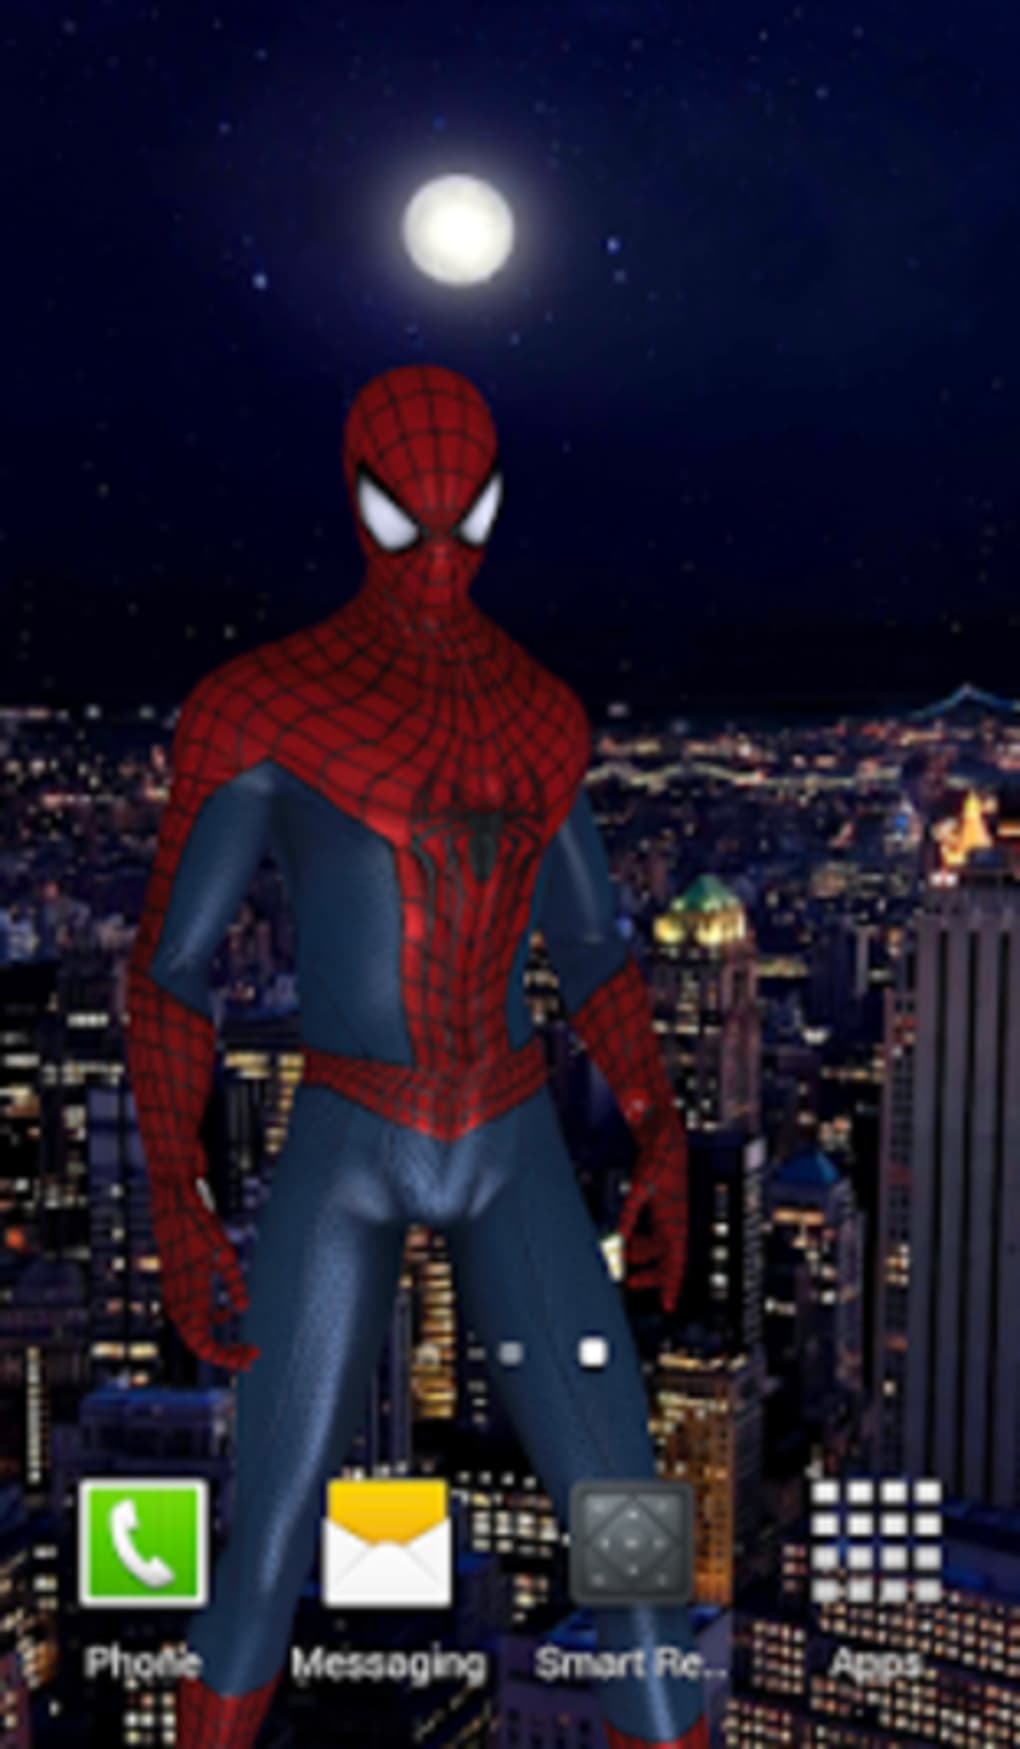 Download Amazing Spider-Man 3D Live WP 2.13 for Android